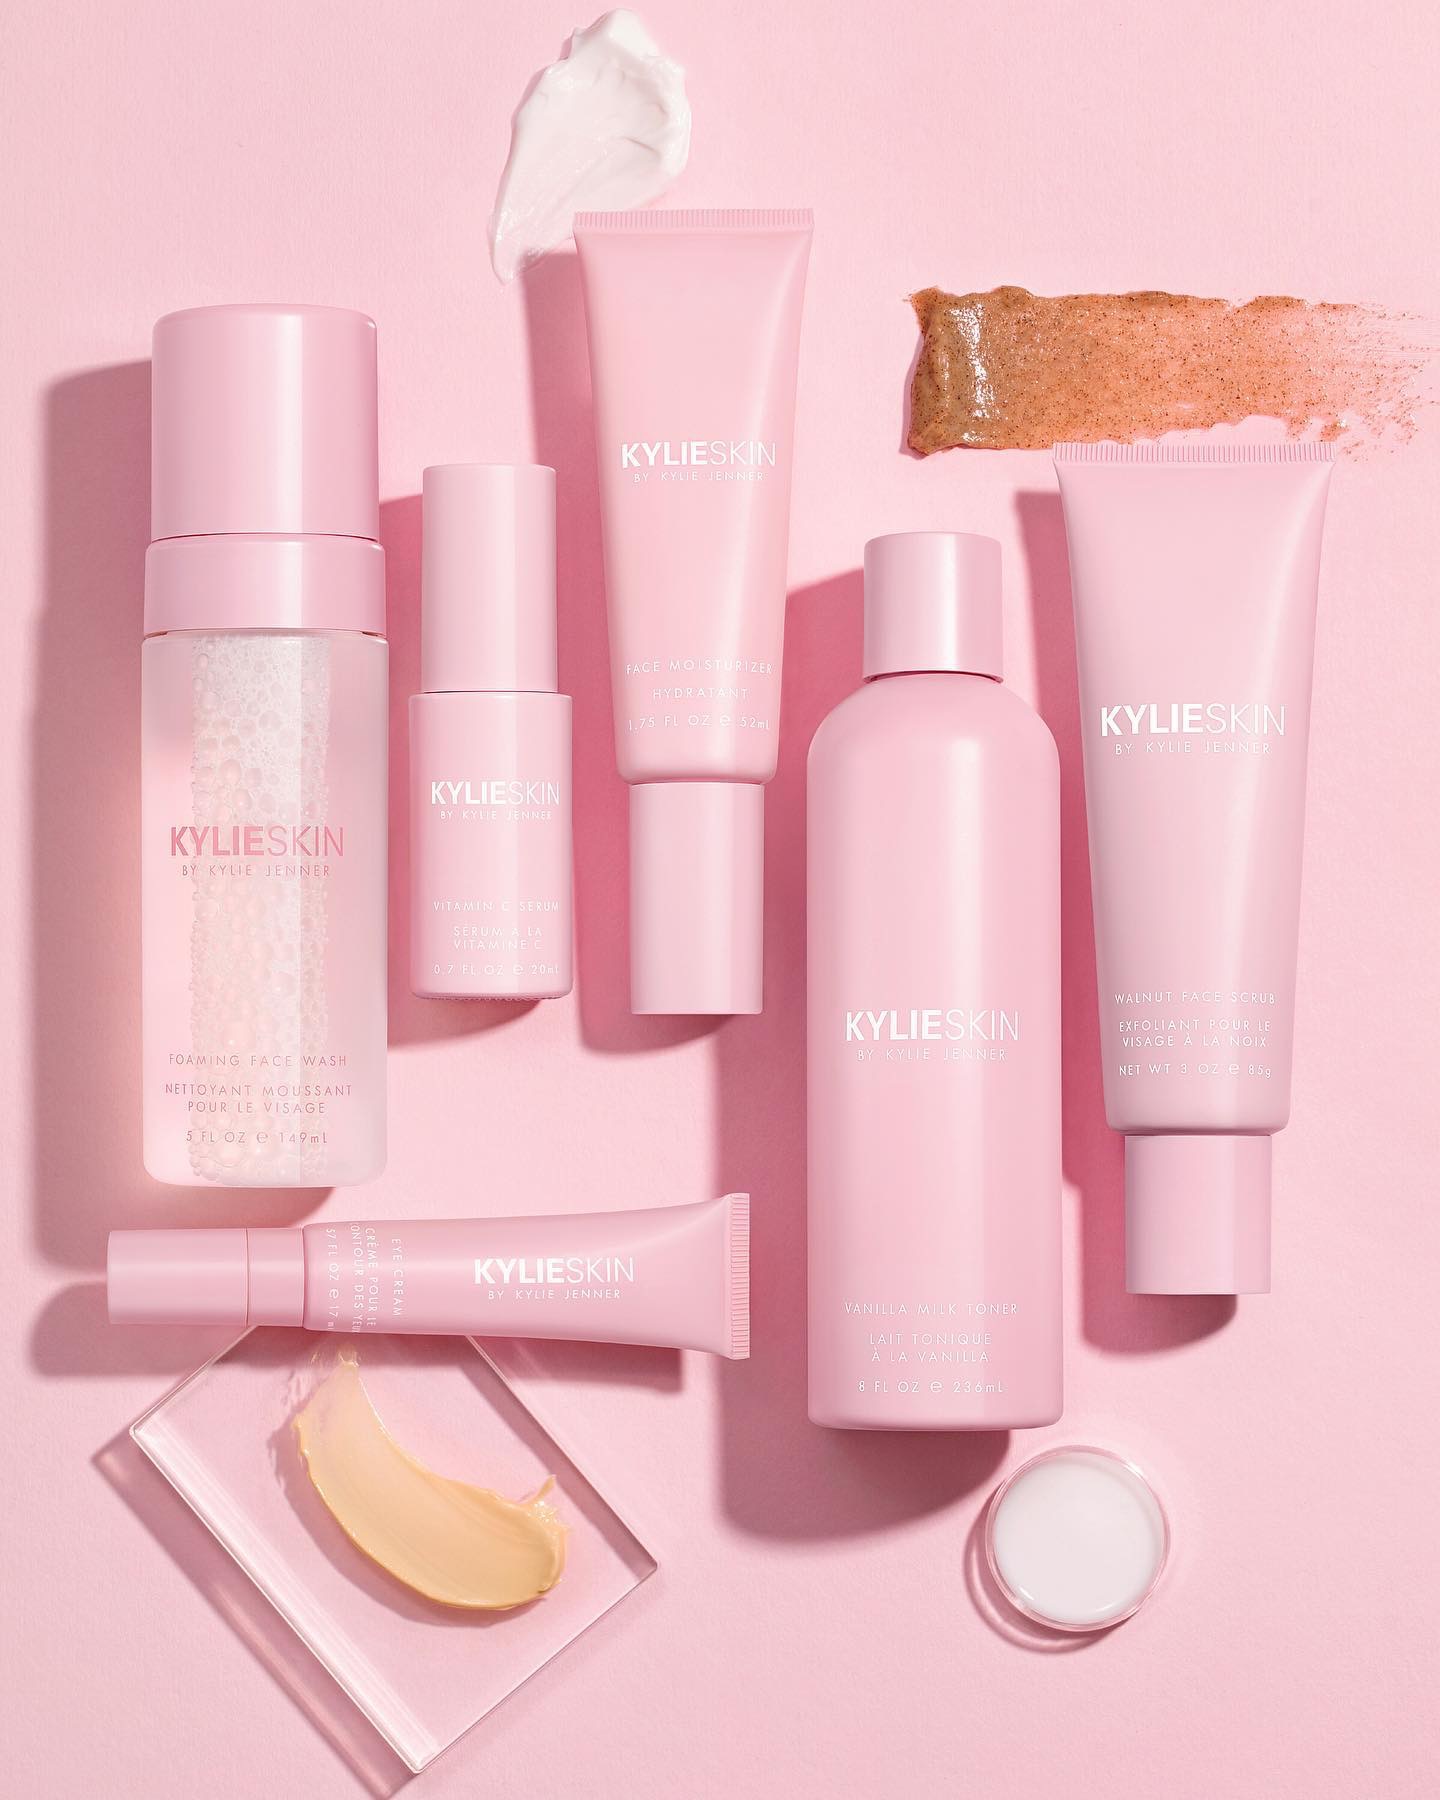 Kylie Skin products